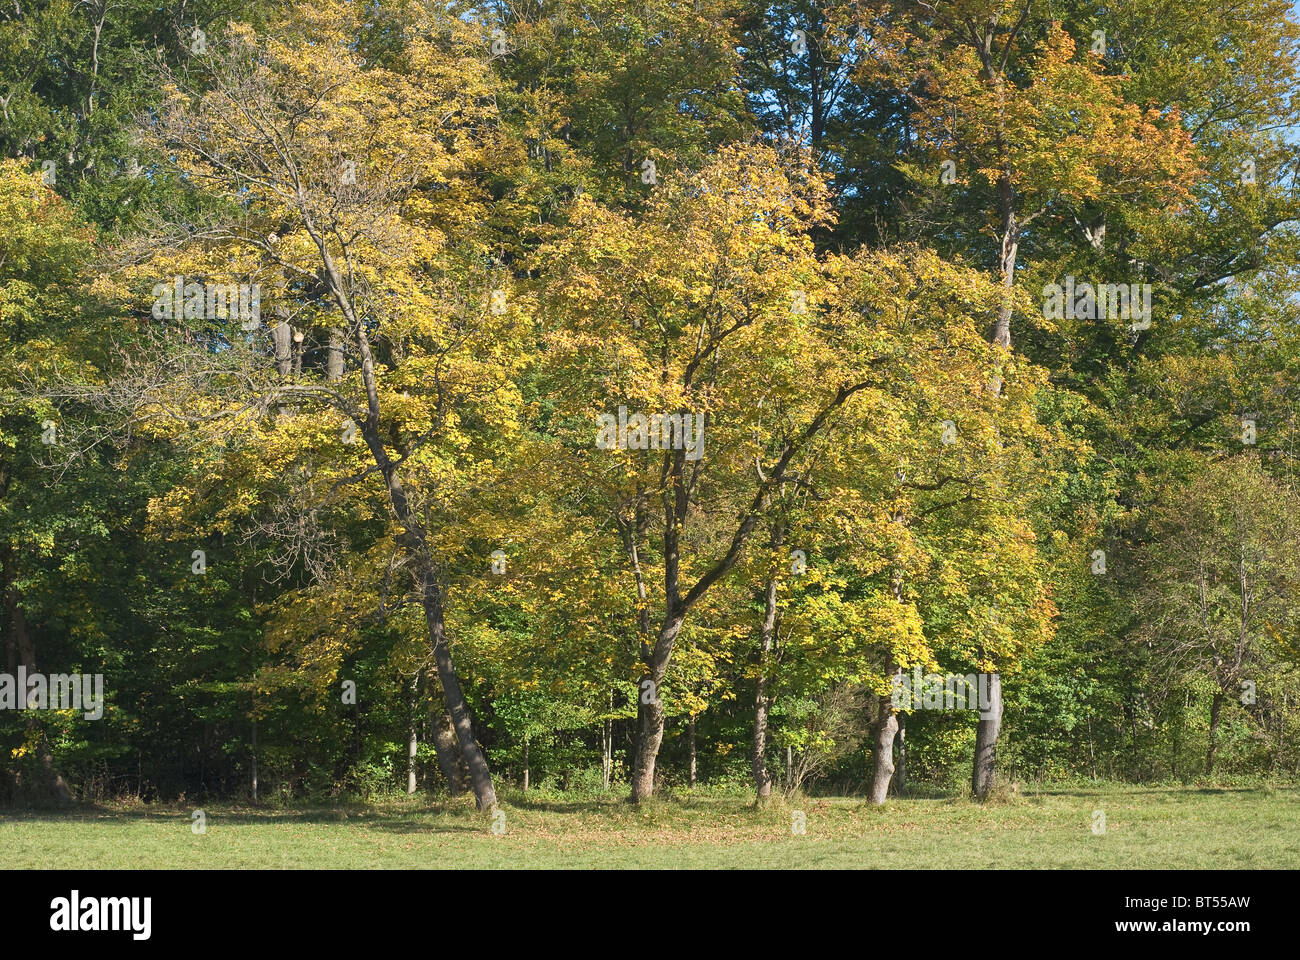 Peaceful Tree Landscape with Early Autumn Colors Stock Photo